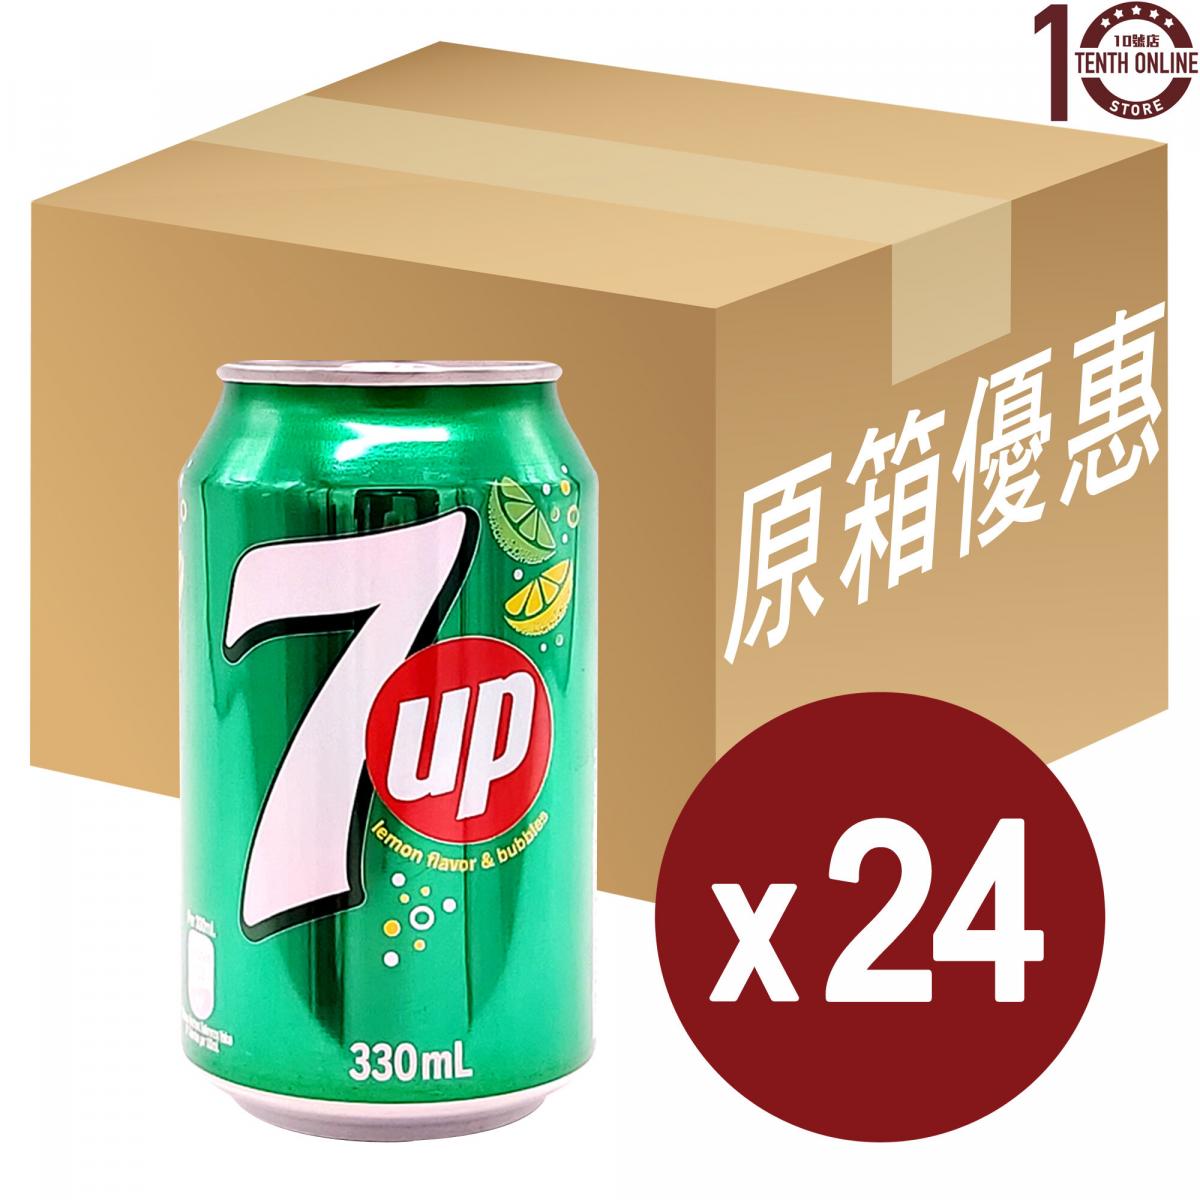 7up Soft Drink Canned - Full Case 330ml (Random Packing)